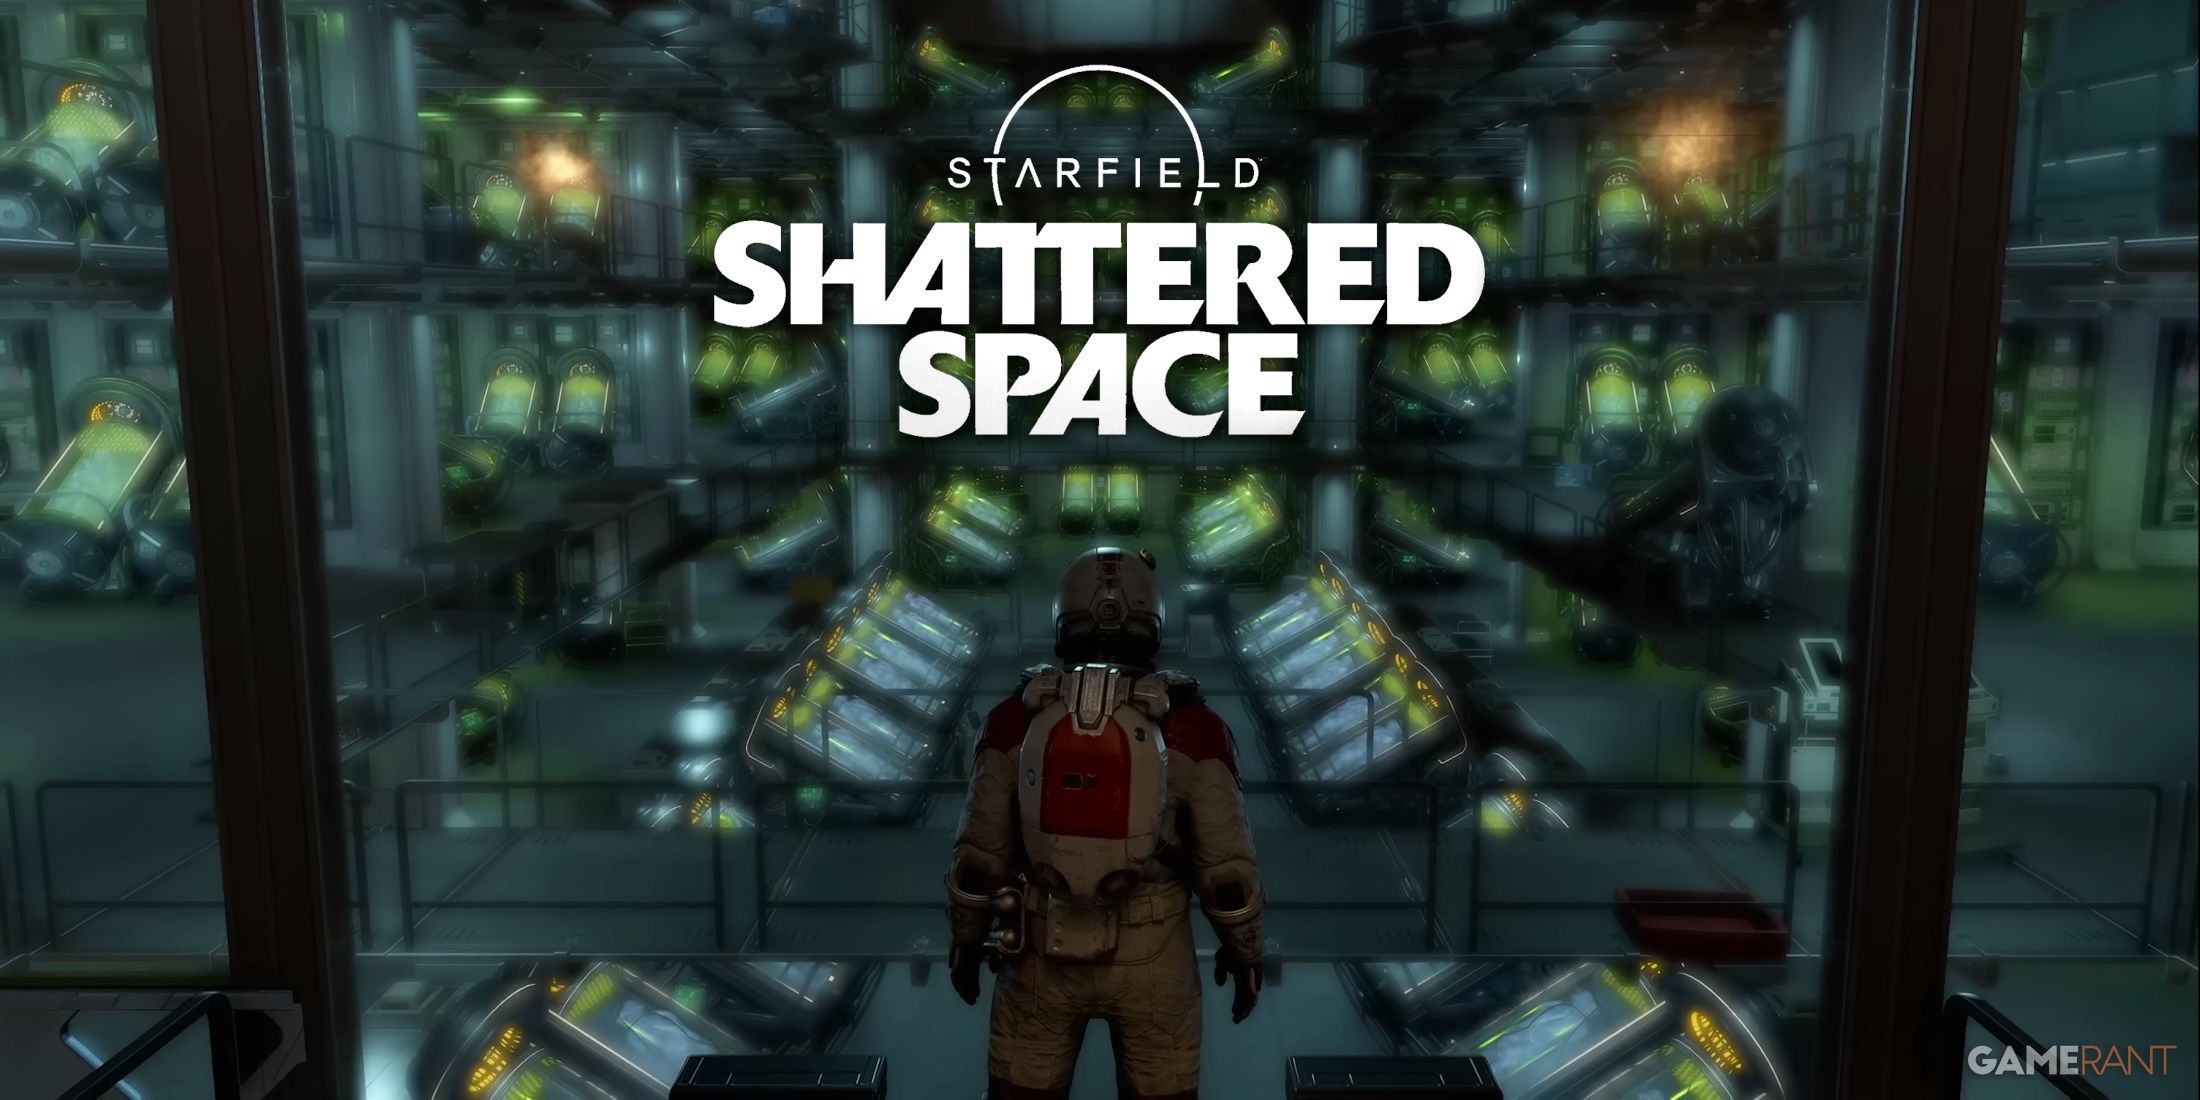 Starfield Shattered Space logo overlaid on trailer screencap